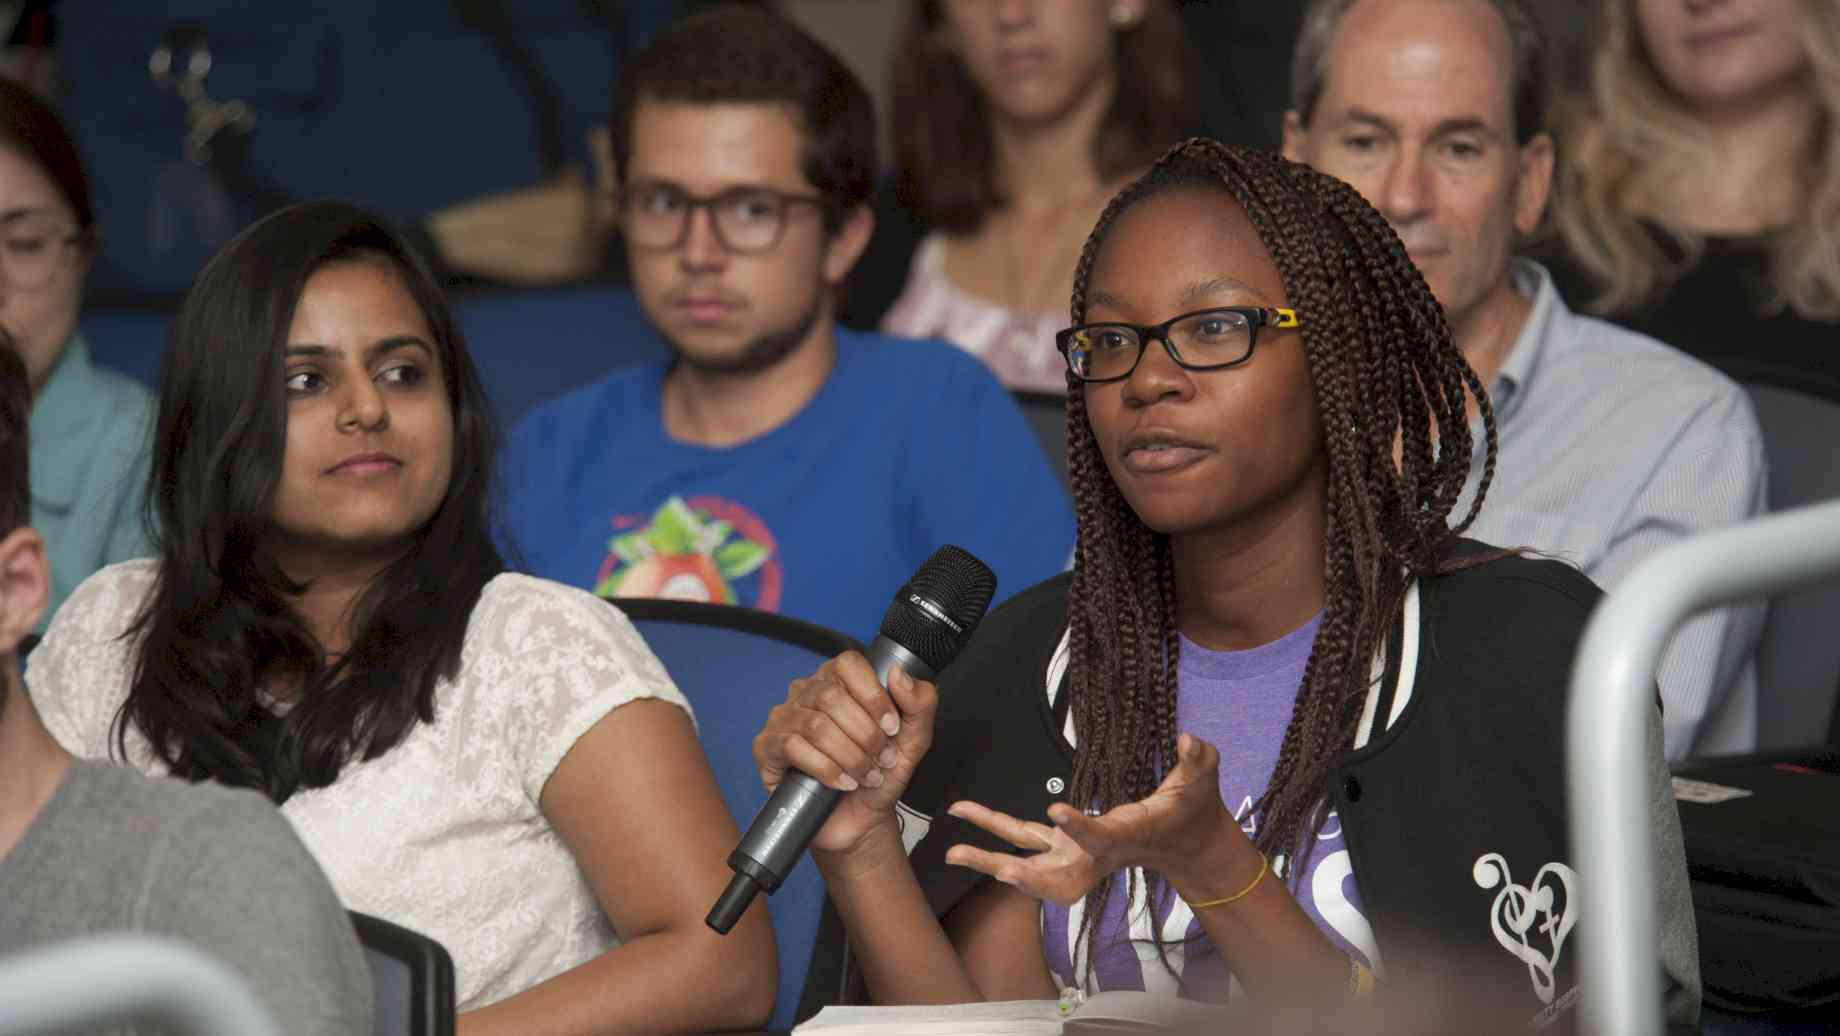 Audience member asks a question during Dr. Fernanda Pitta’s visit to UF